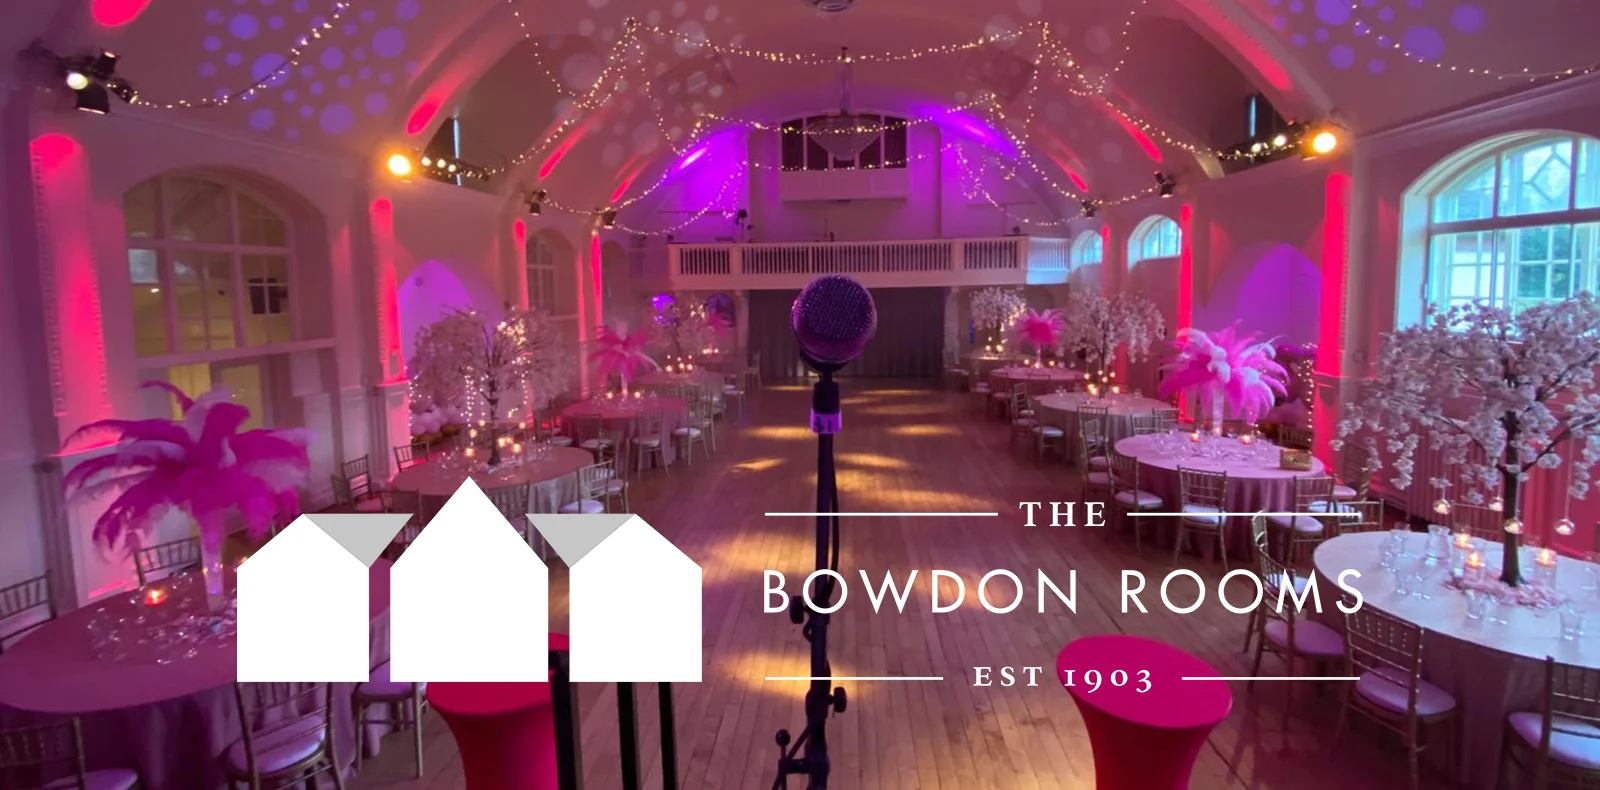 The Bowdon Rooms on MIX56